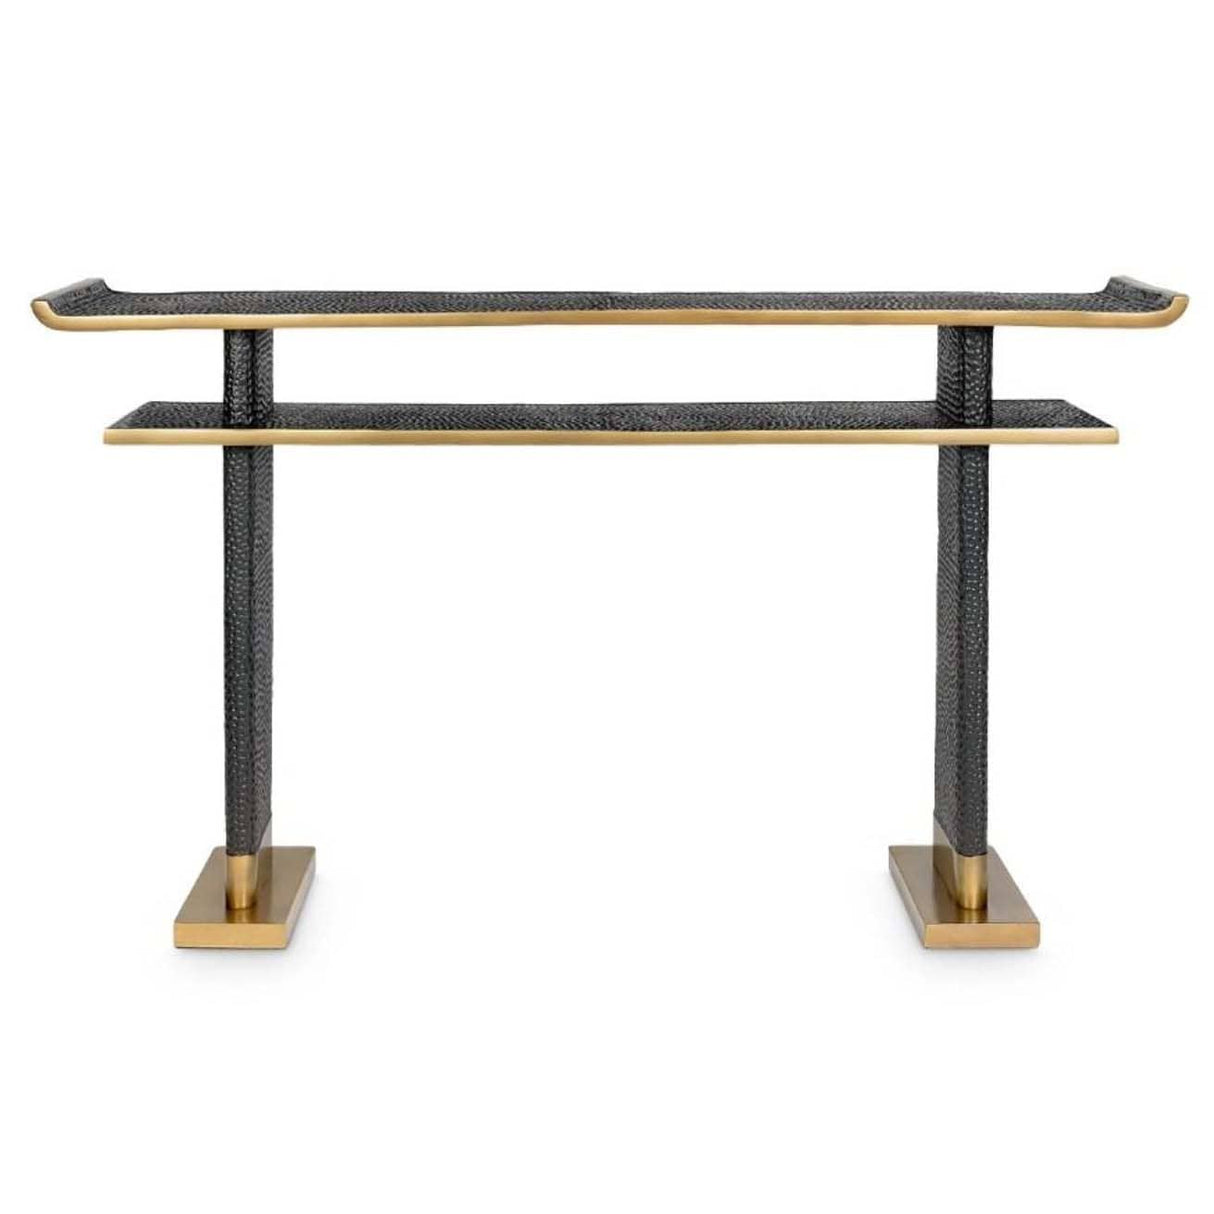 DUPRE CONSOLE TABLE Console Table DUP-400-883